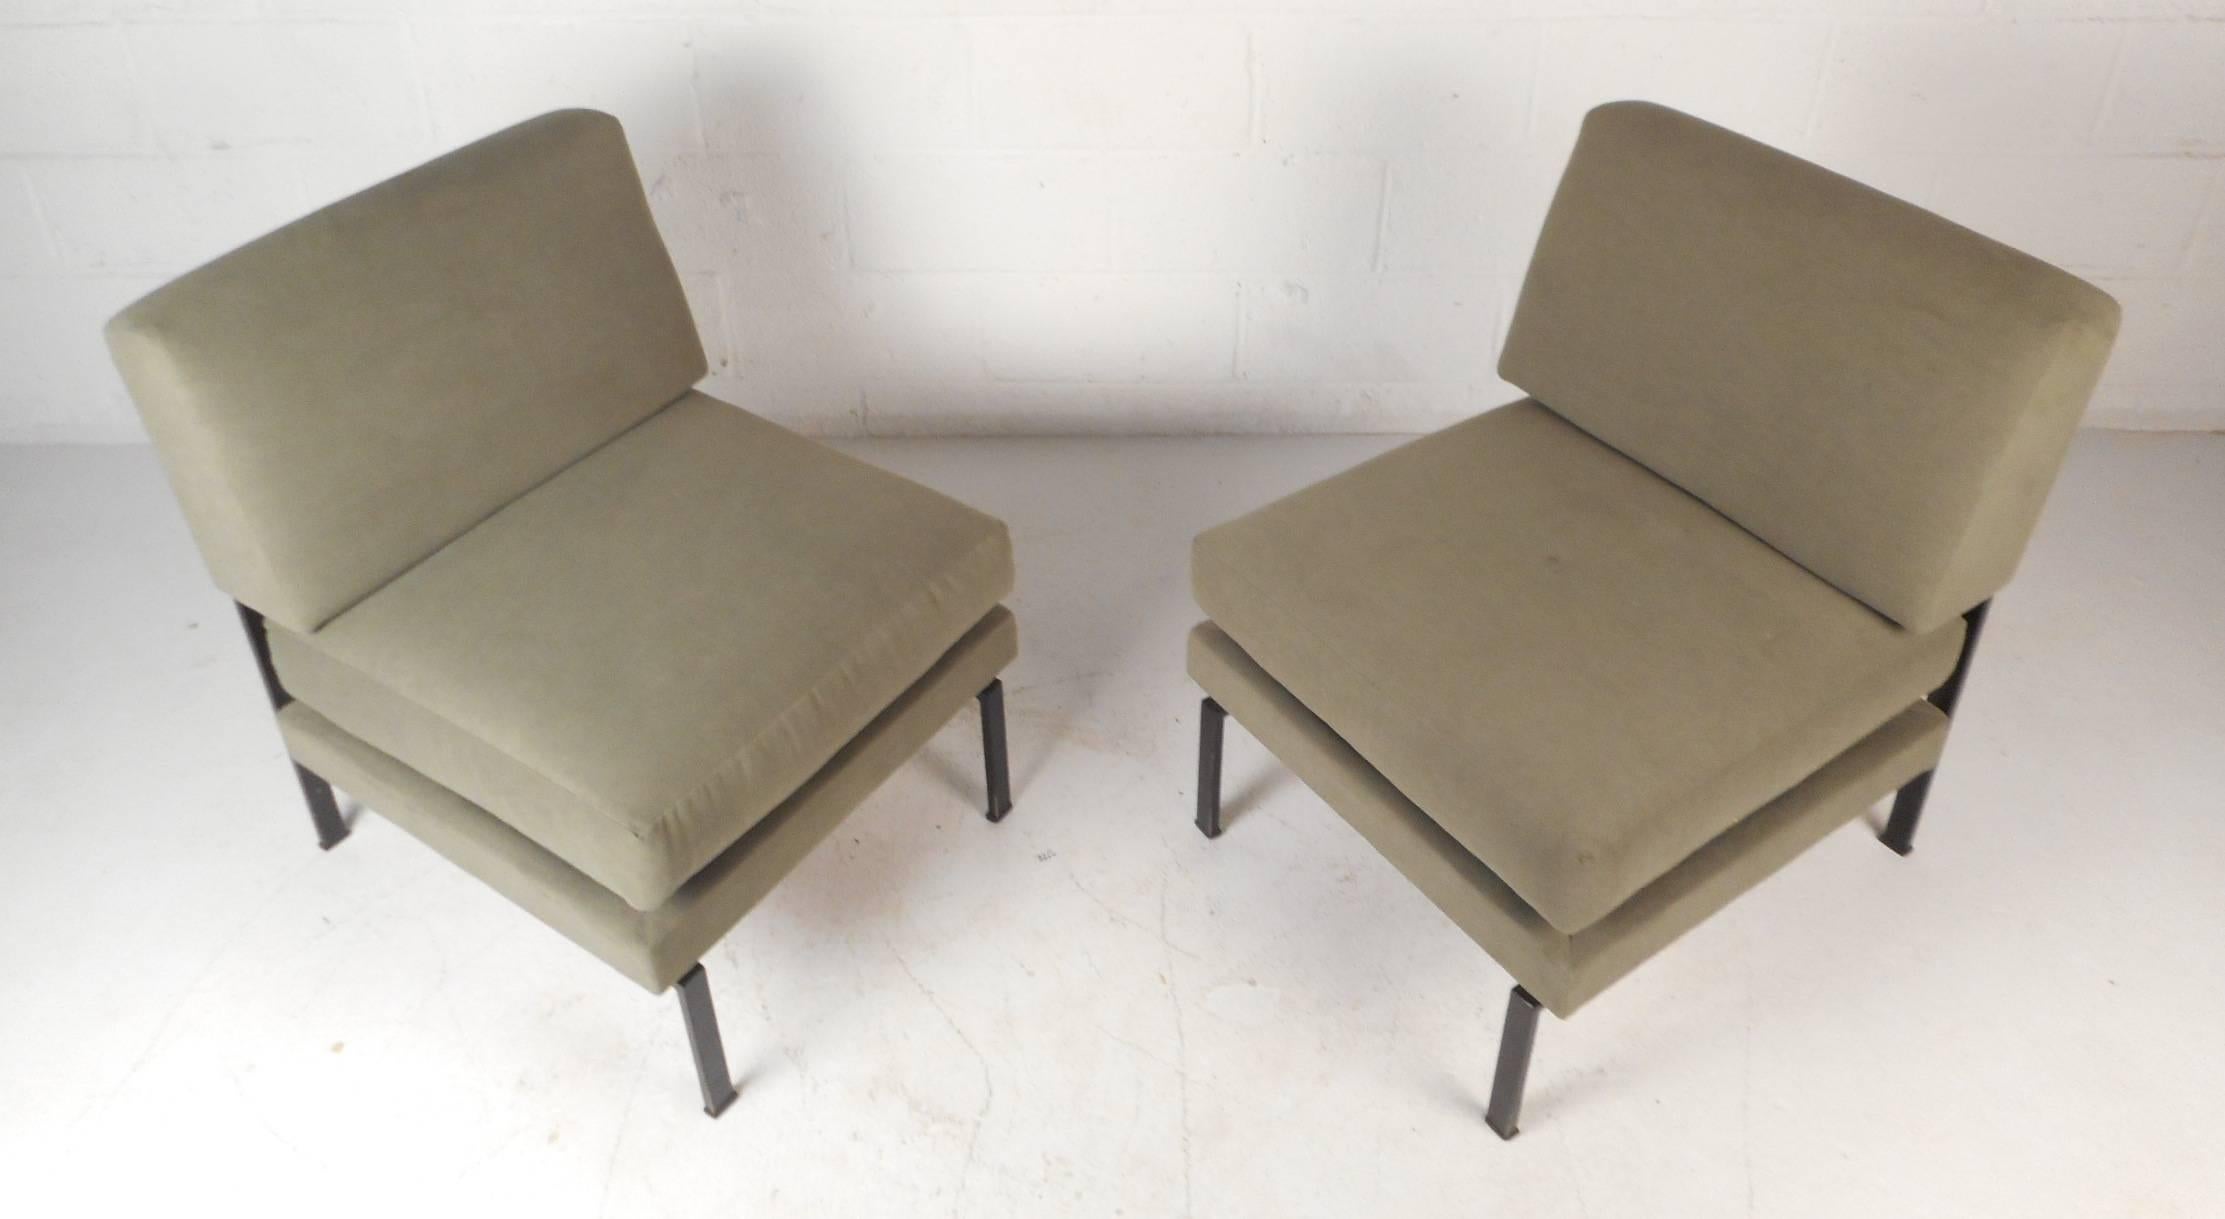 This elegant vintage modern pair of lounge chairs feature the ability to adjust in depth from 23 inches to 30 inches providing a variety of seating positions. Sleek design with lovely plush green upholstery and a heavy iron frame. Unique Italian